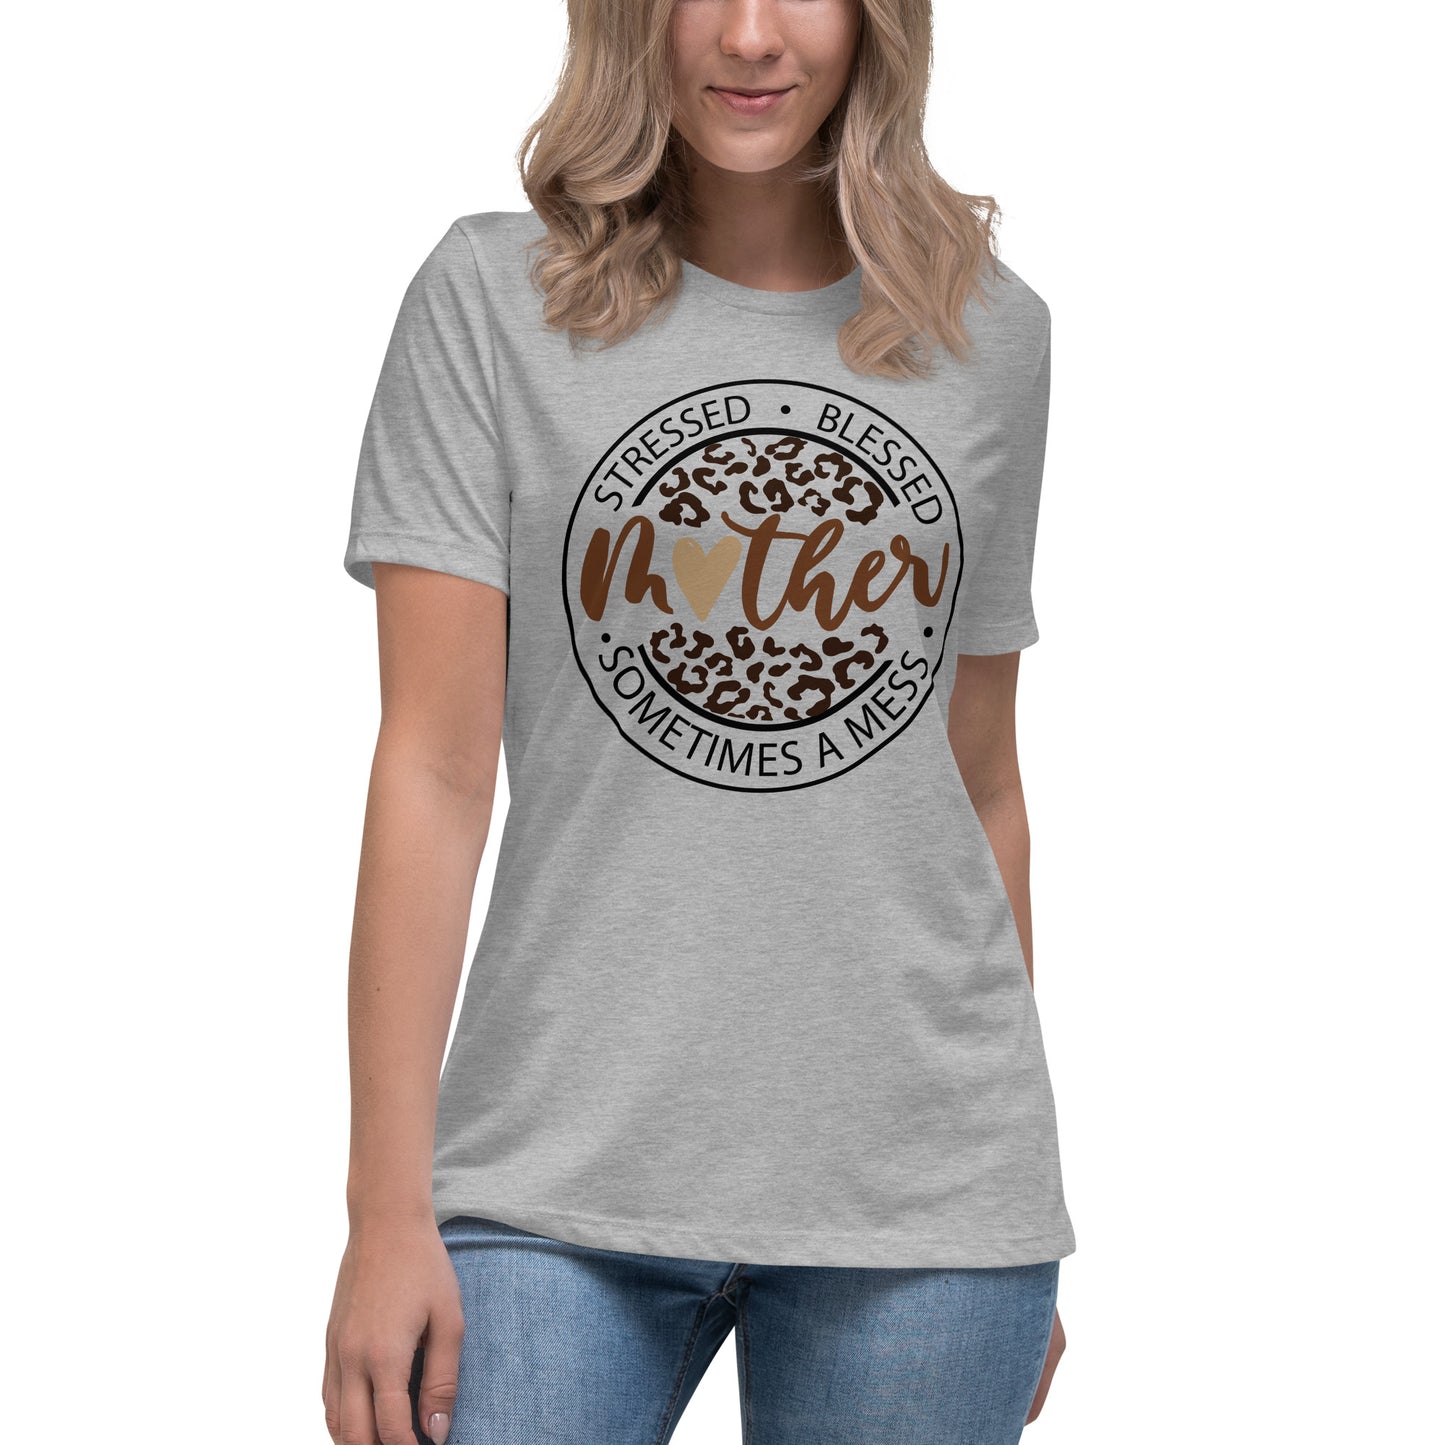 "Mother: Stressed, Blessed & A Mess" Relaxed T-Shirt